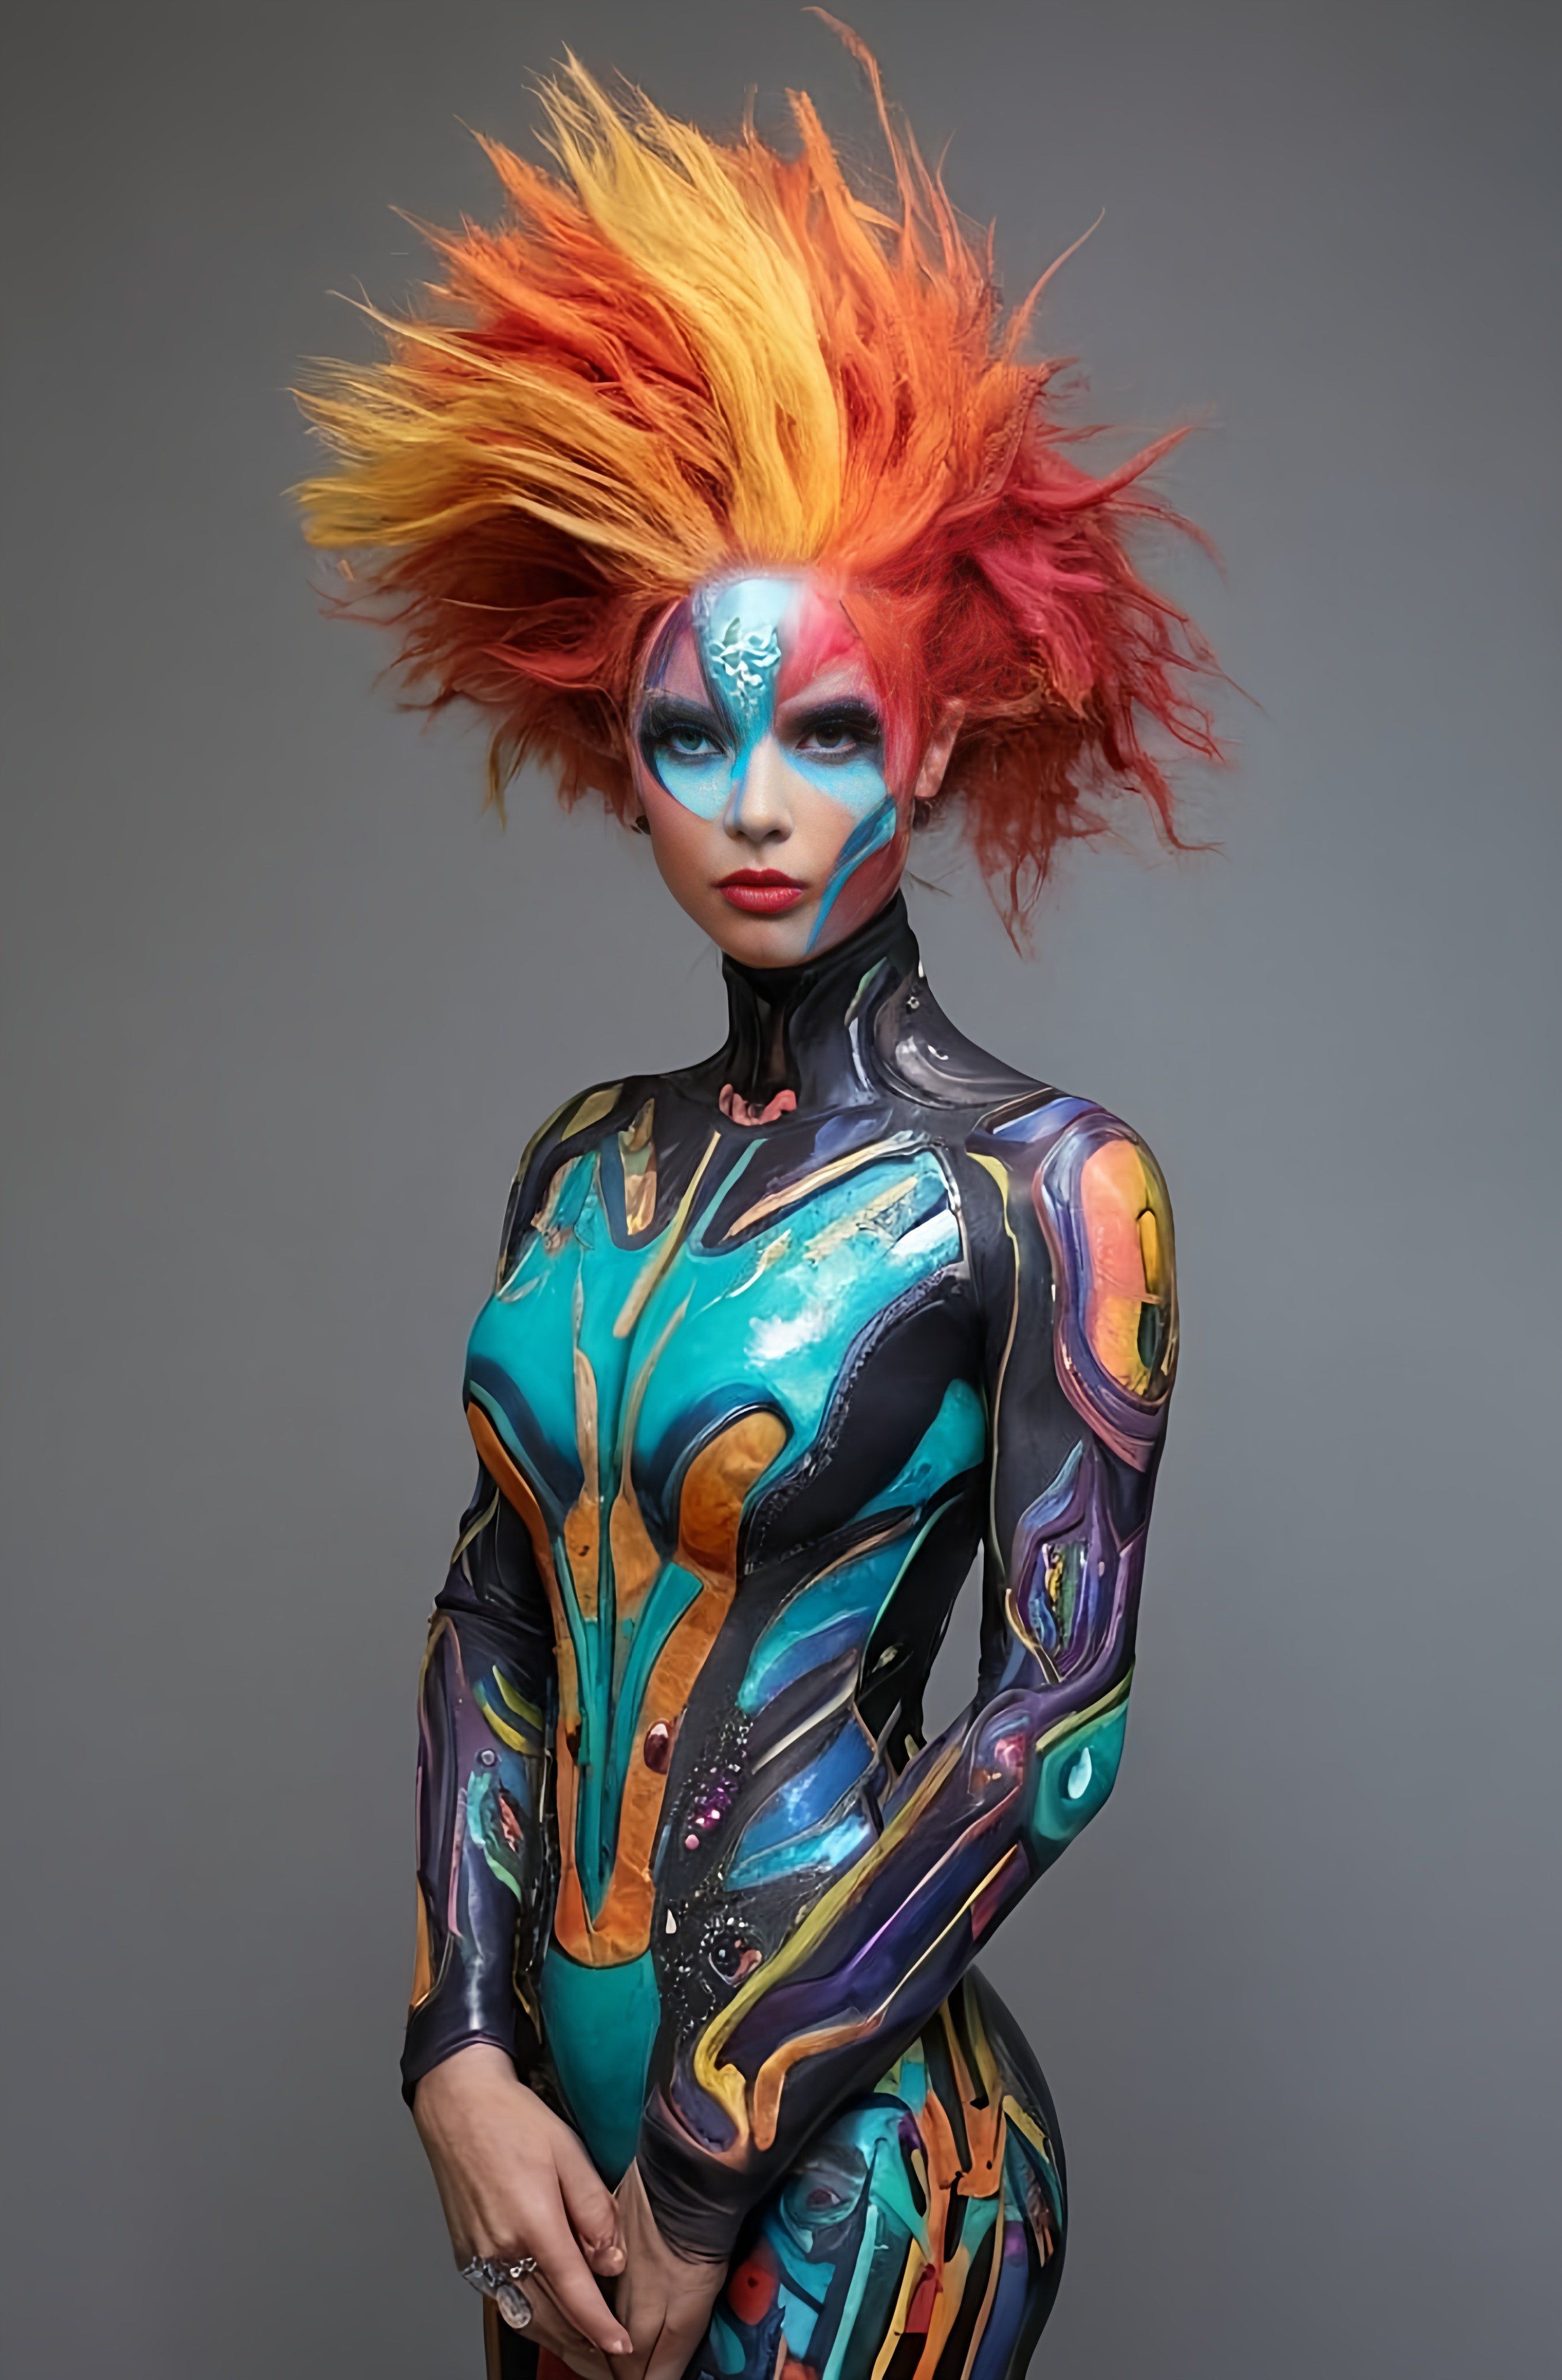 Prompt: a woman with a colorful hair and body paint posing for a photo in a body suit with a futuristic design